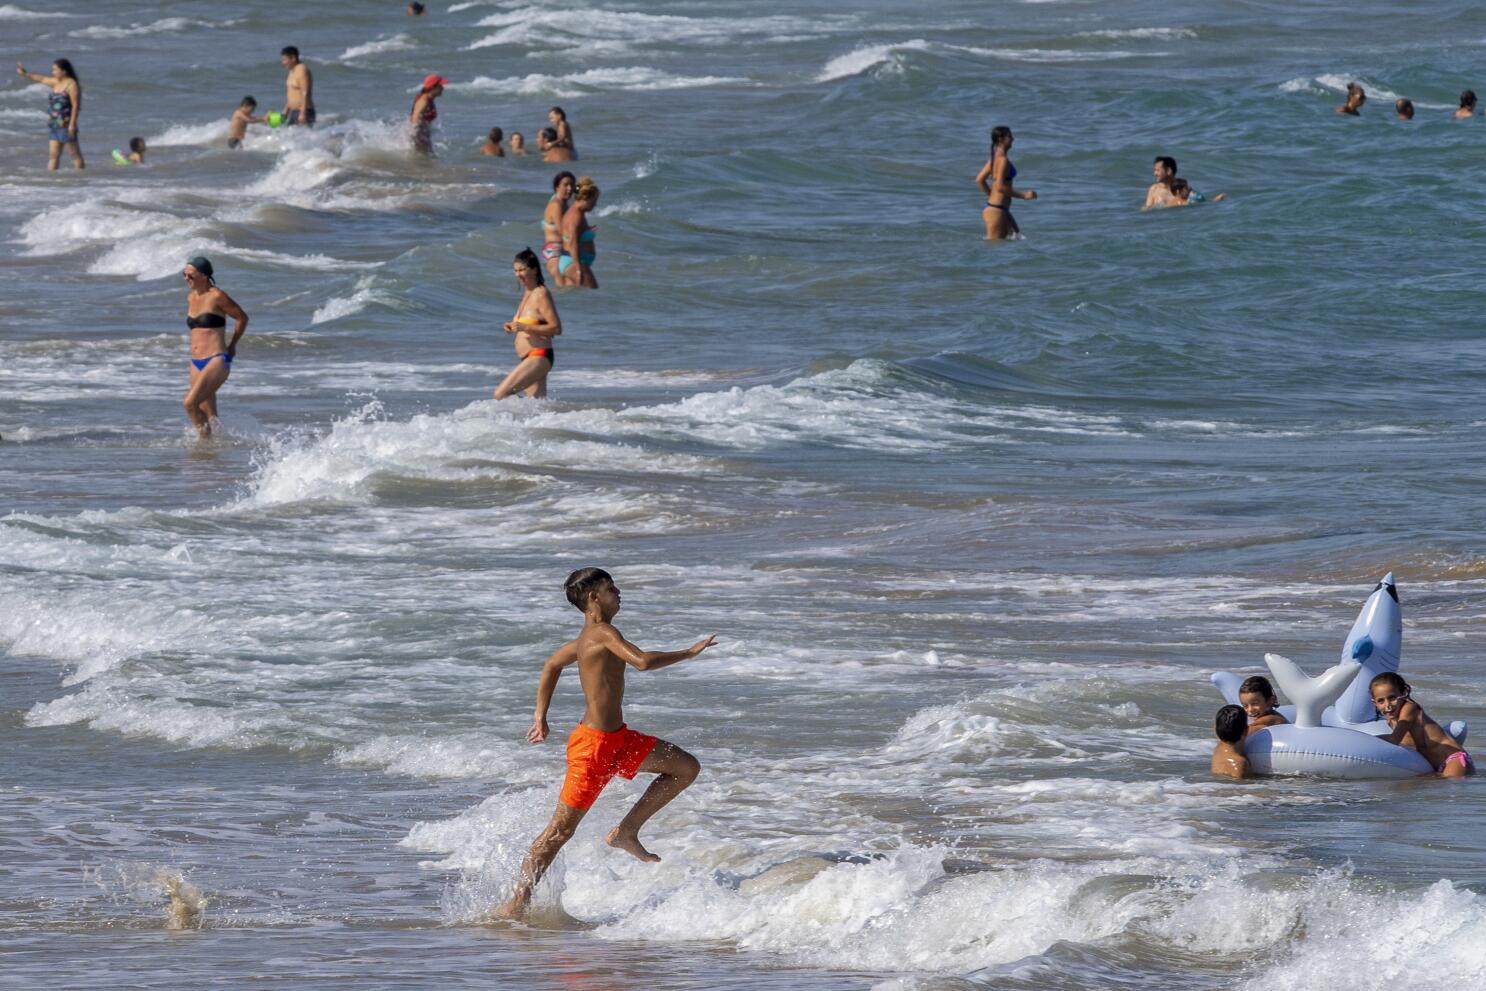 Israel Rushes to Protect Marine Life as Mediterranean Warms